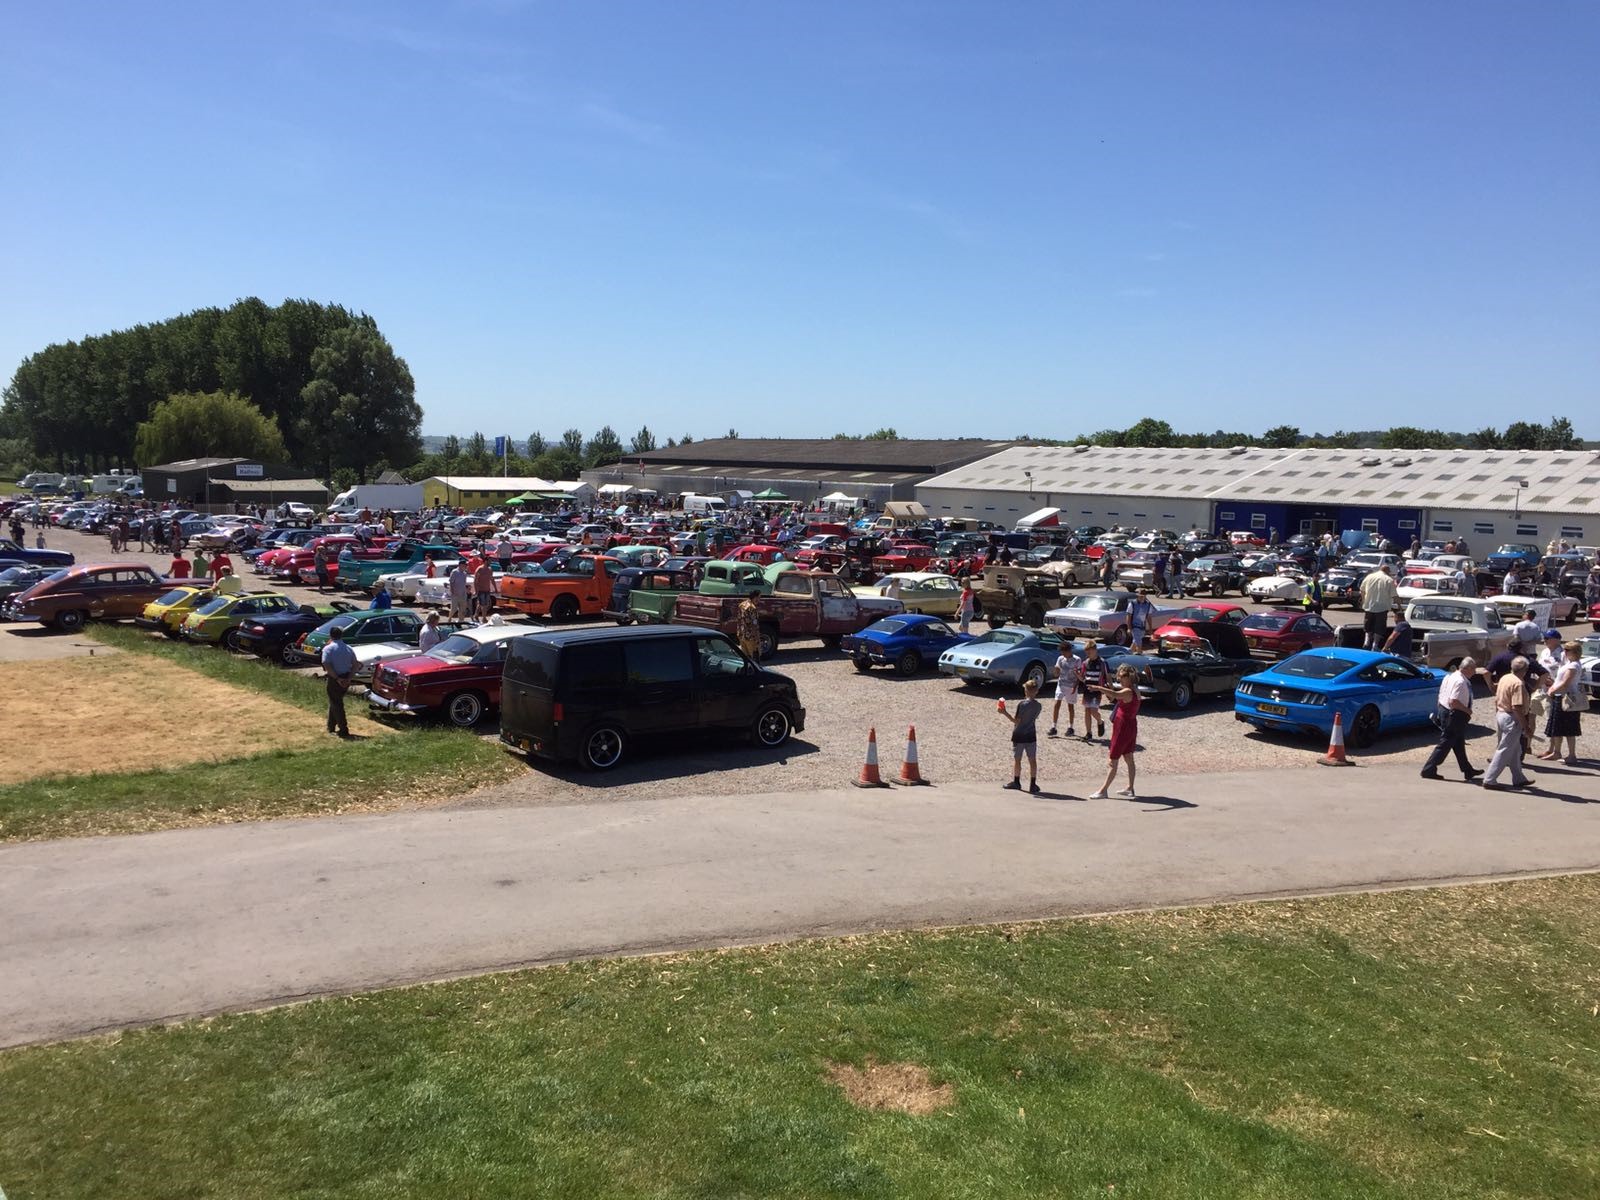 Car park of people attending event